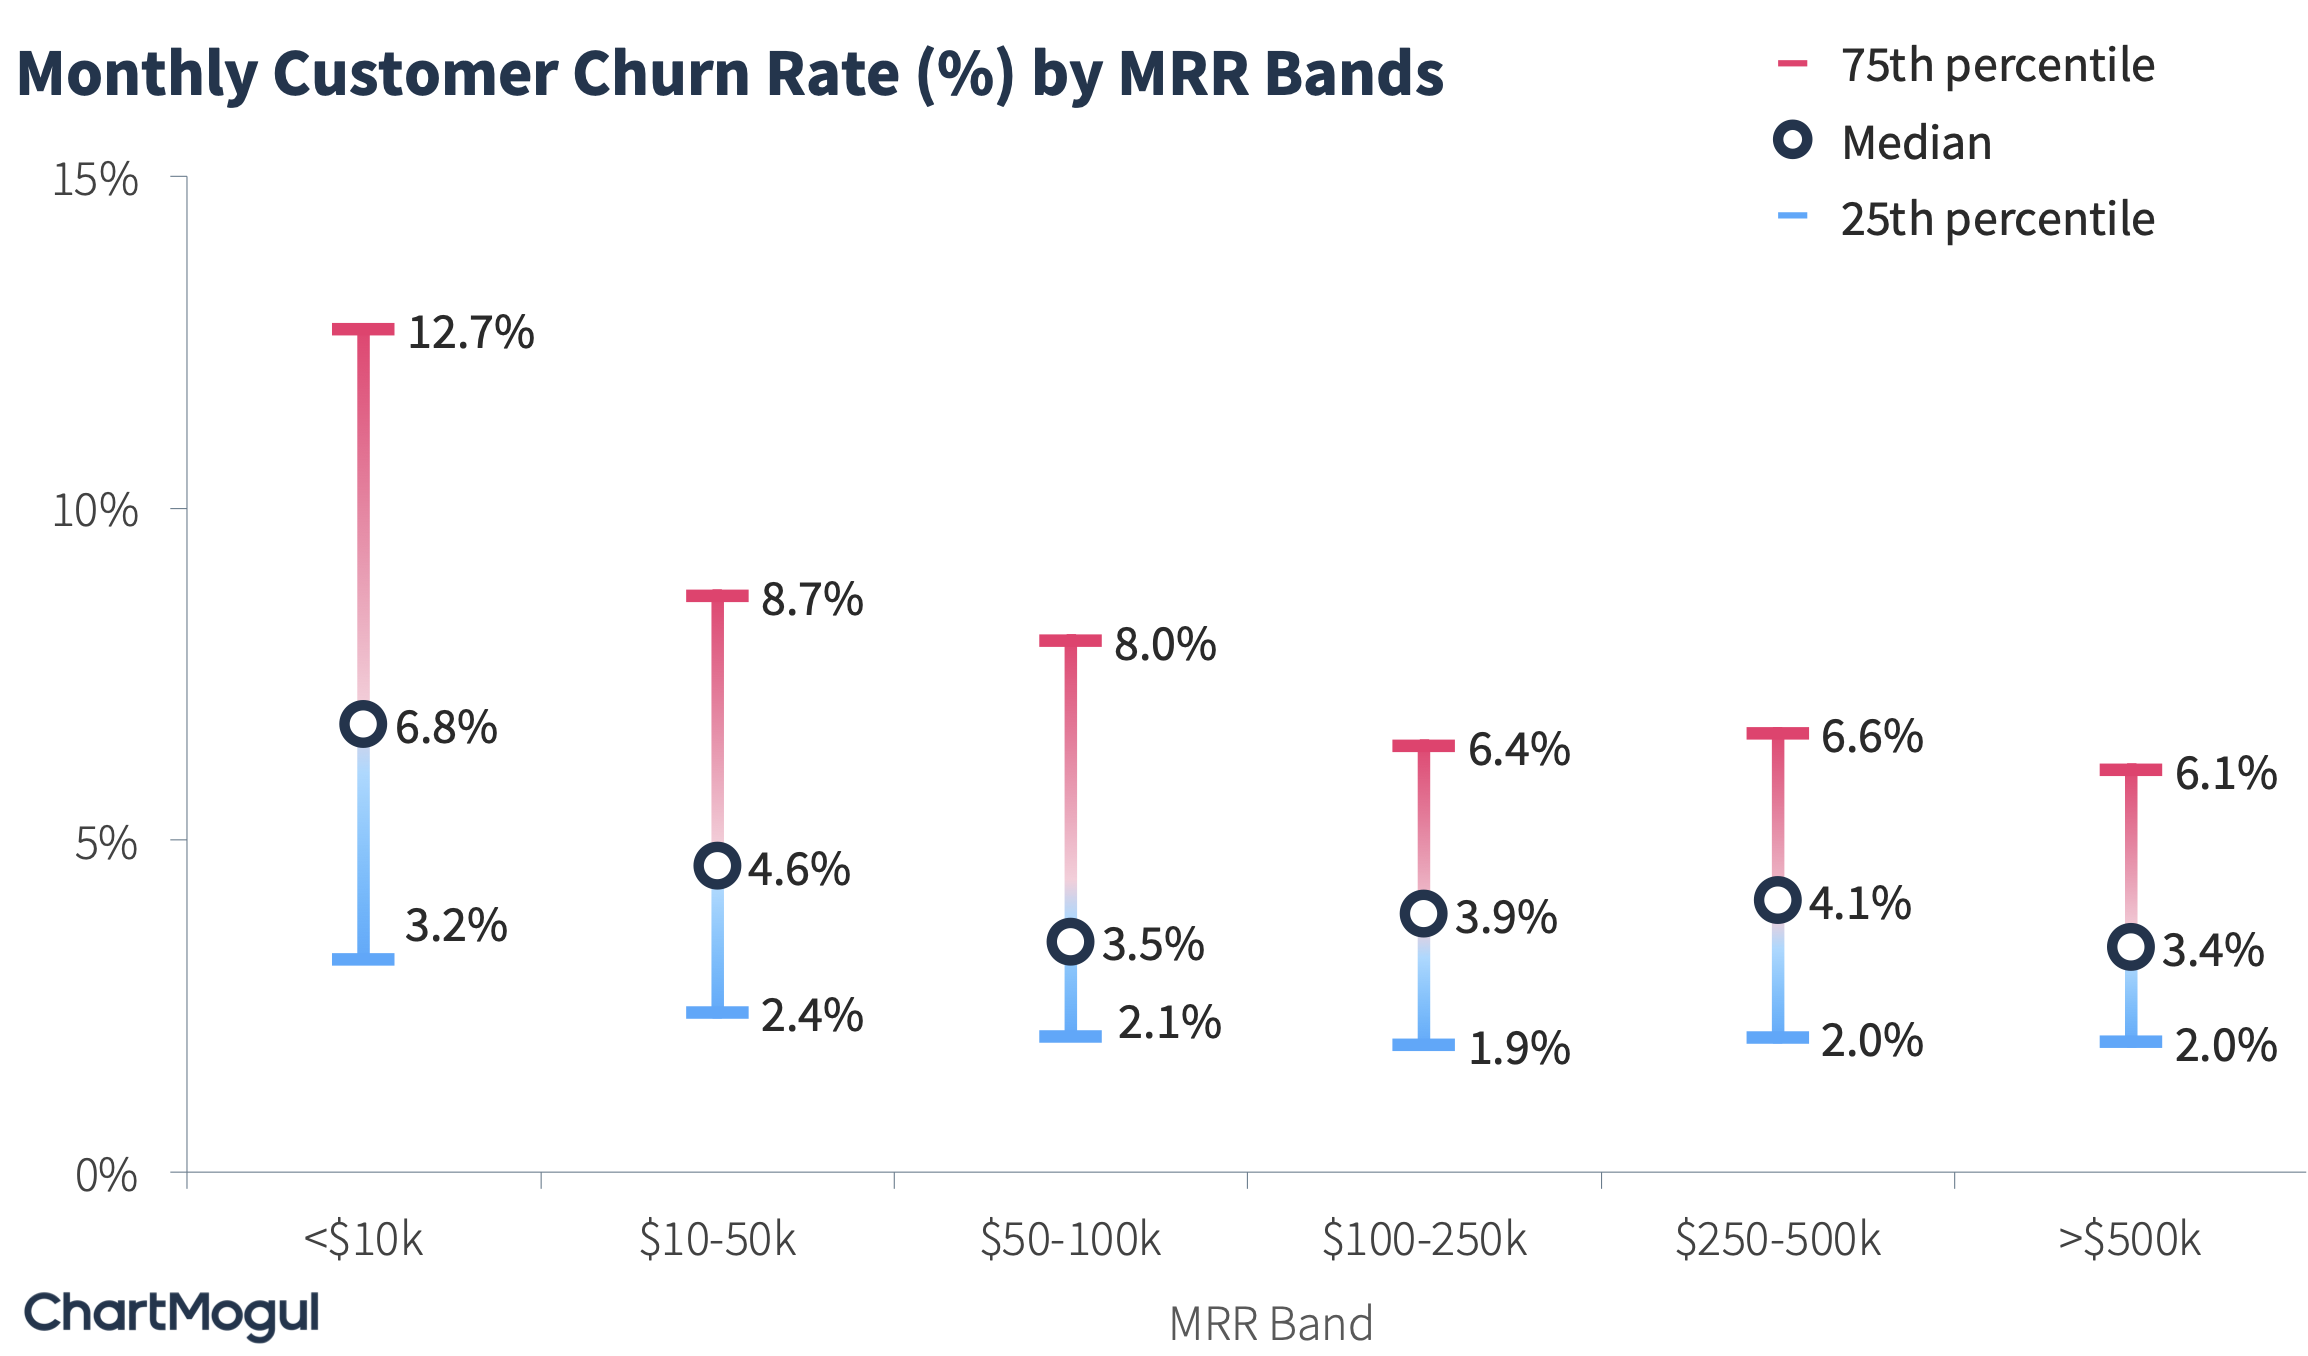 Percentiles of Monthly Customer Churn Rate by MRR Bands